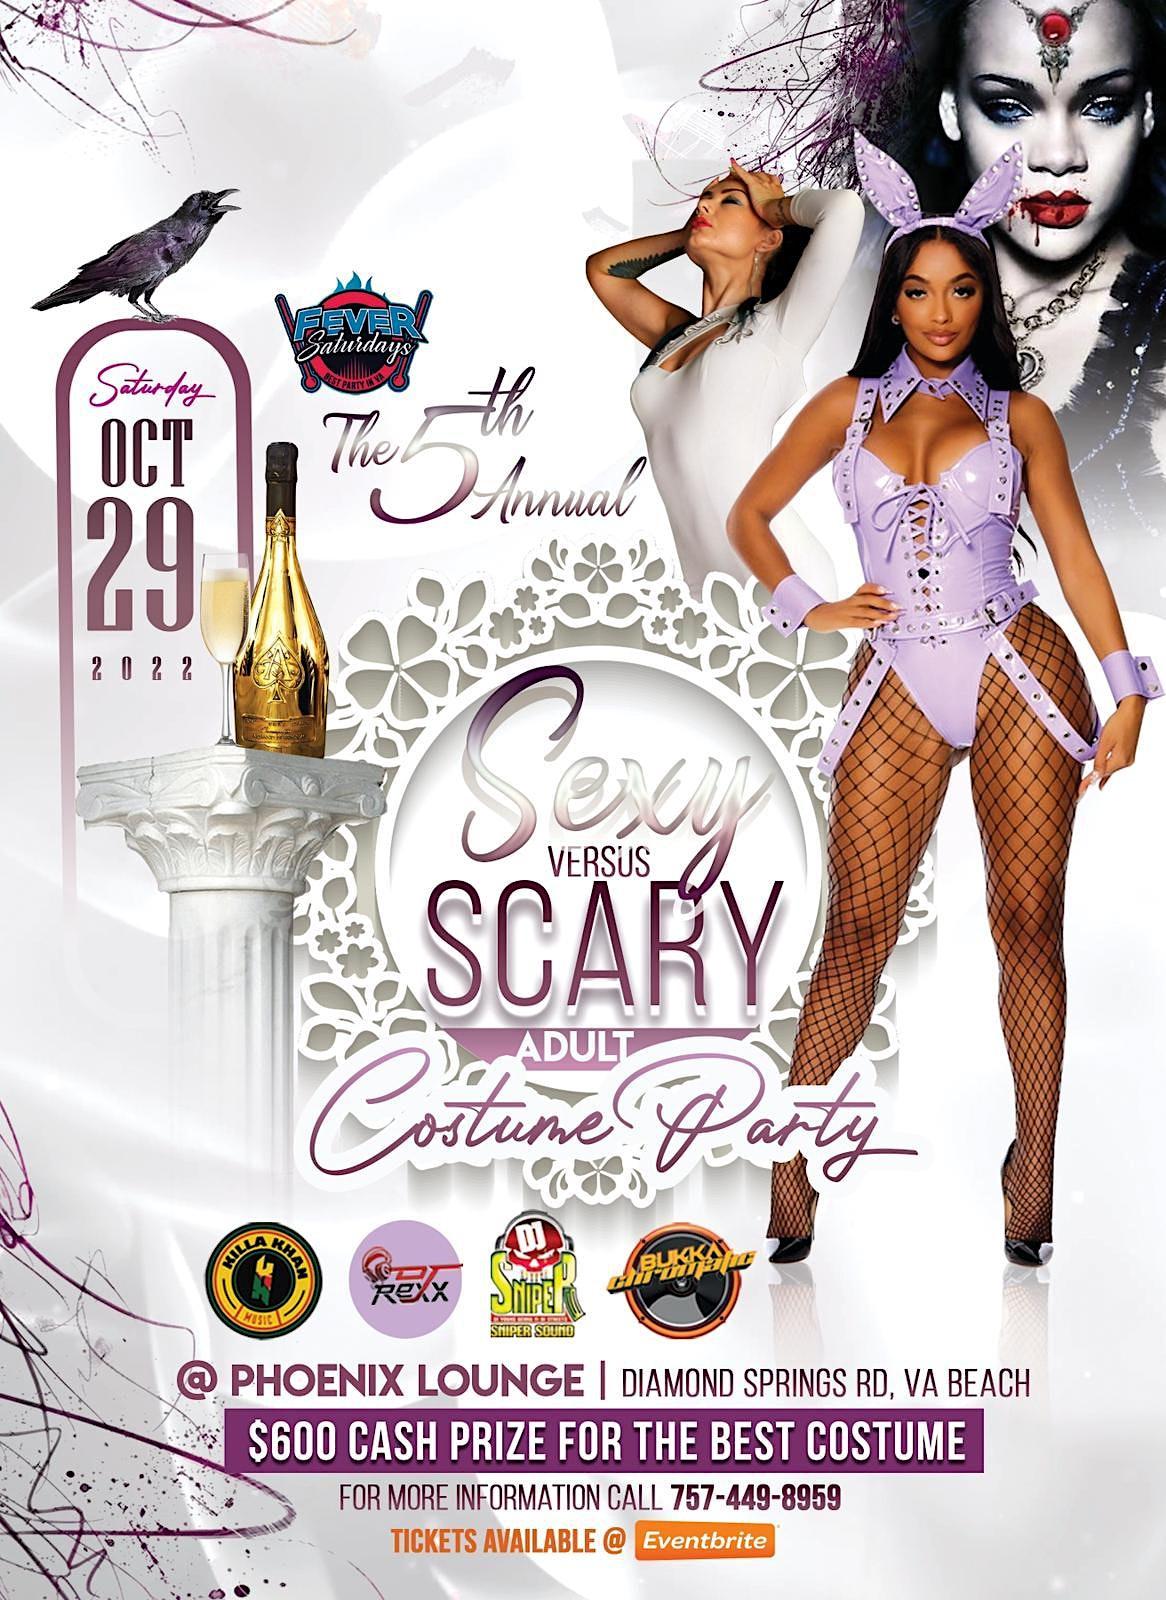 Sexy Vs Scary Adult Halloween Costume Party
Sat Oct 29, 10:00 PM - Sun Oct 30, 2:00 AM
in 9 days